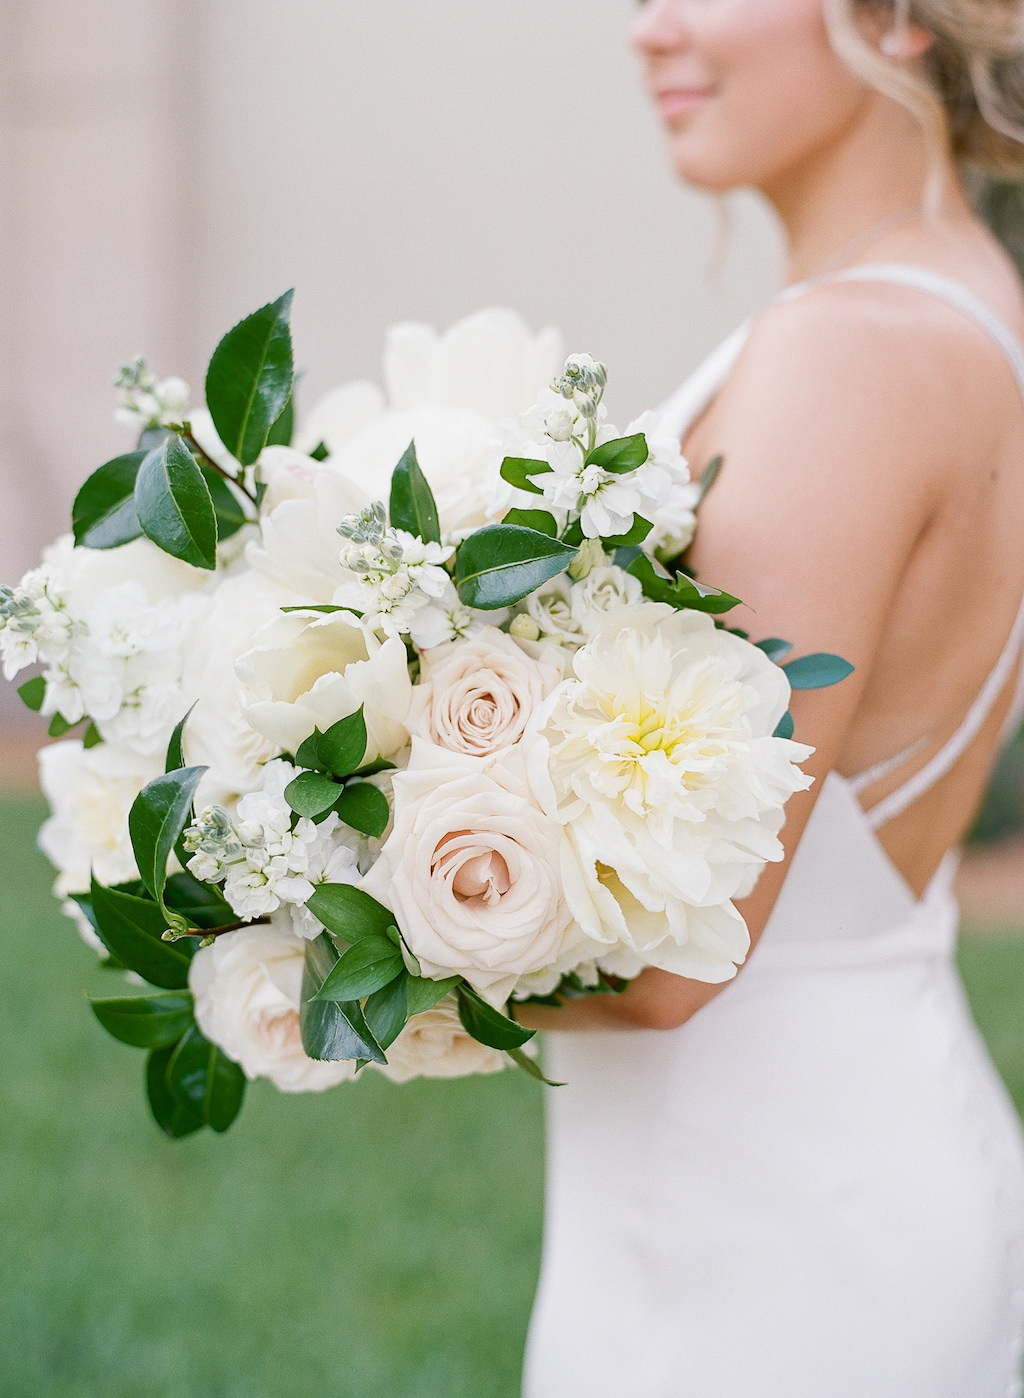 Tampa Bay Bride Holding Classic White, Blush Pink Roses and Greenery Floral Bouquet